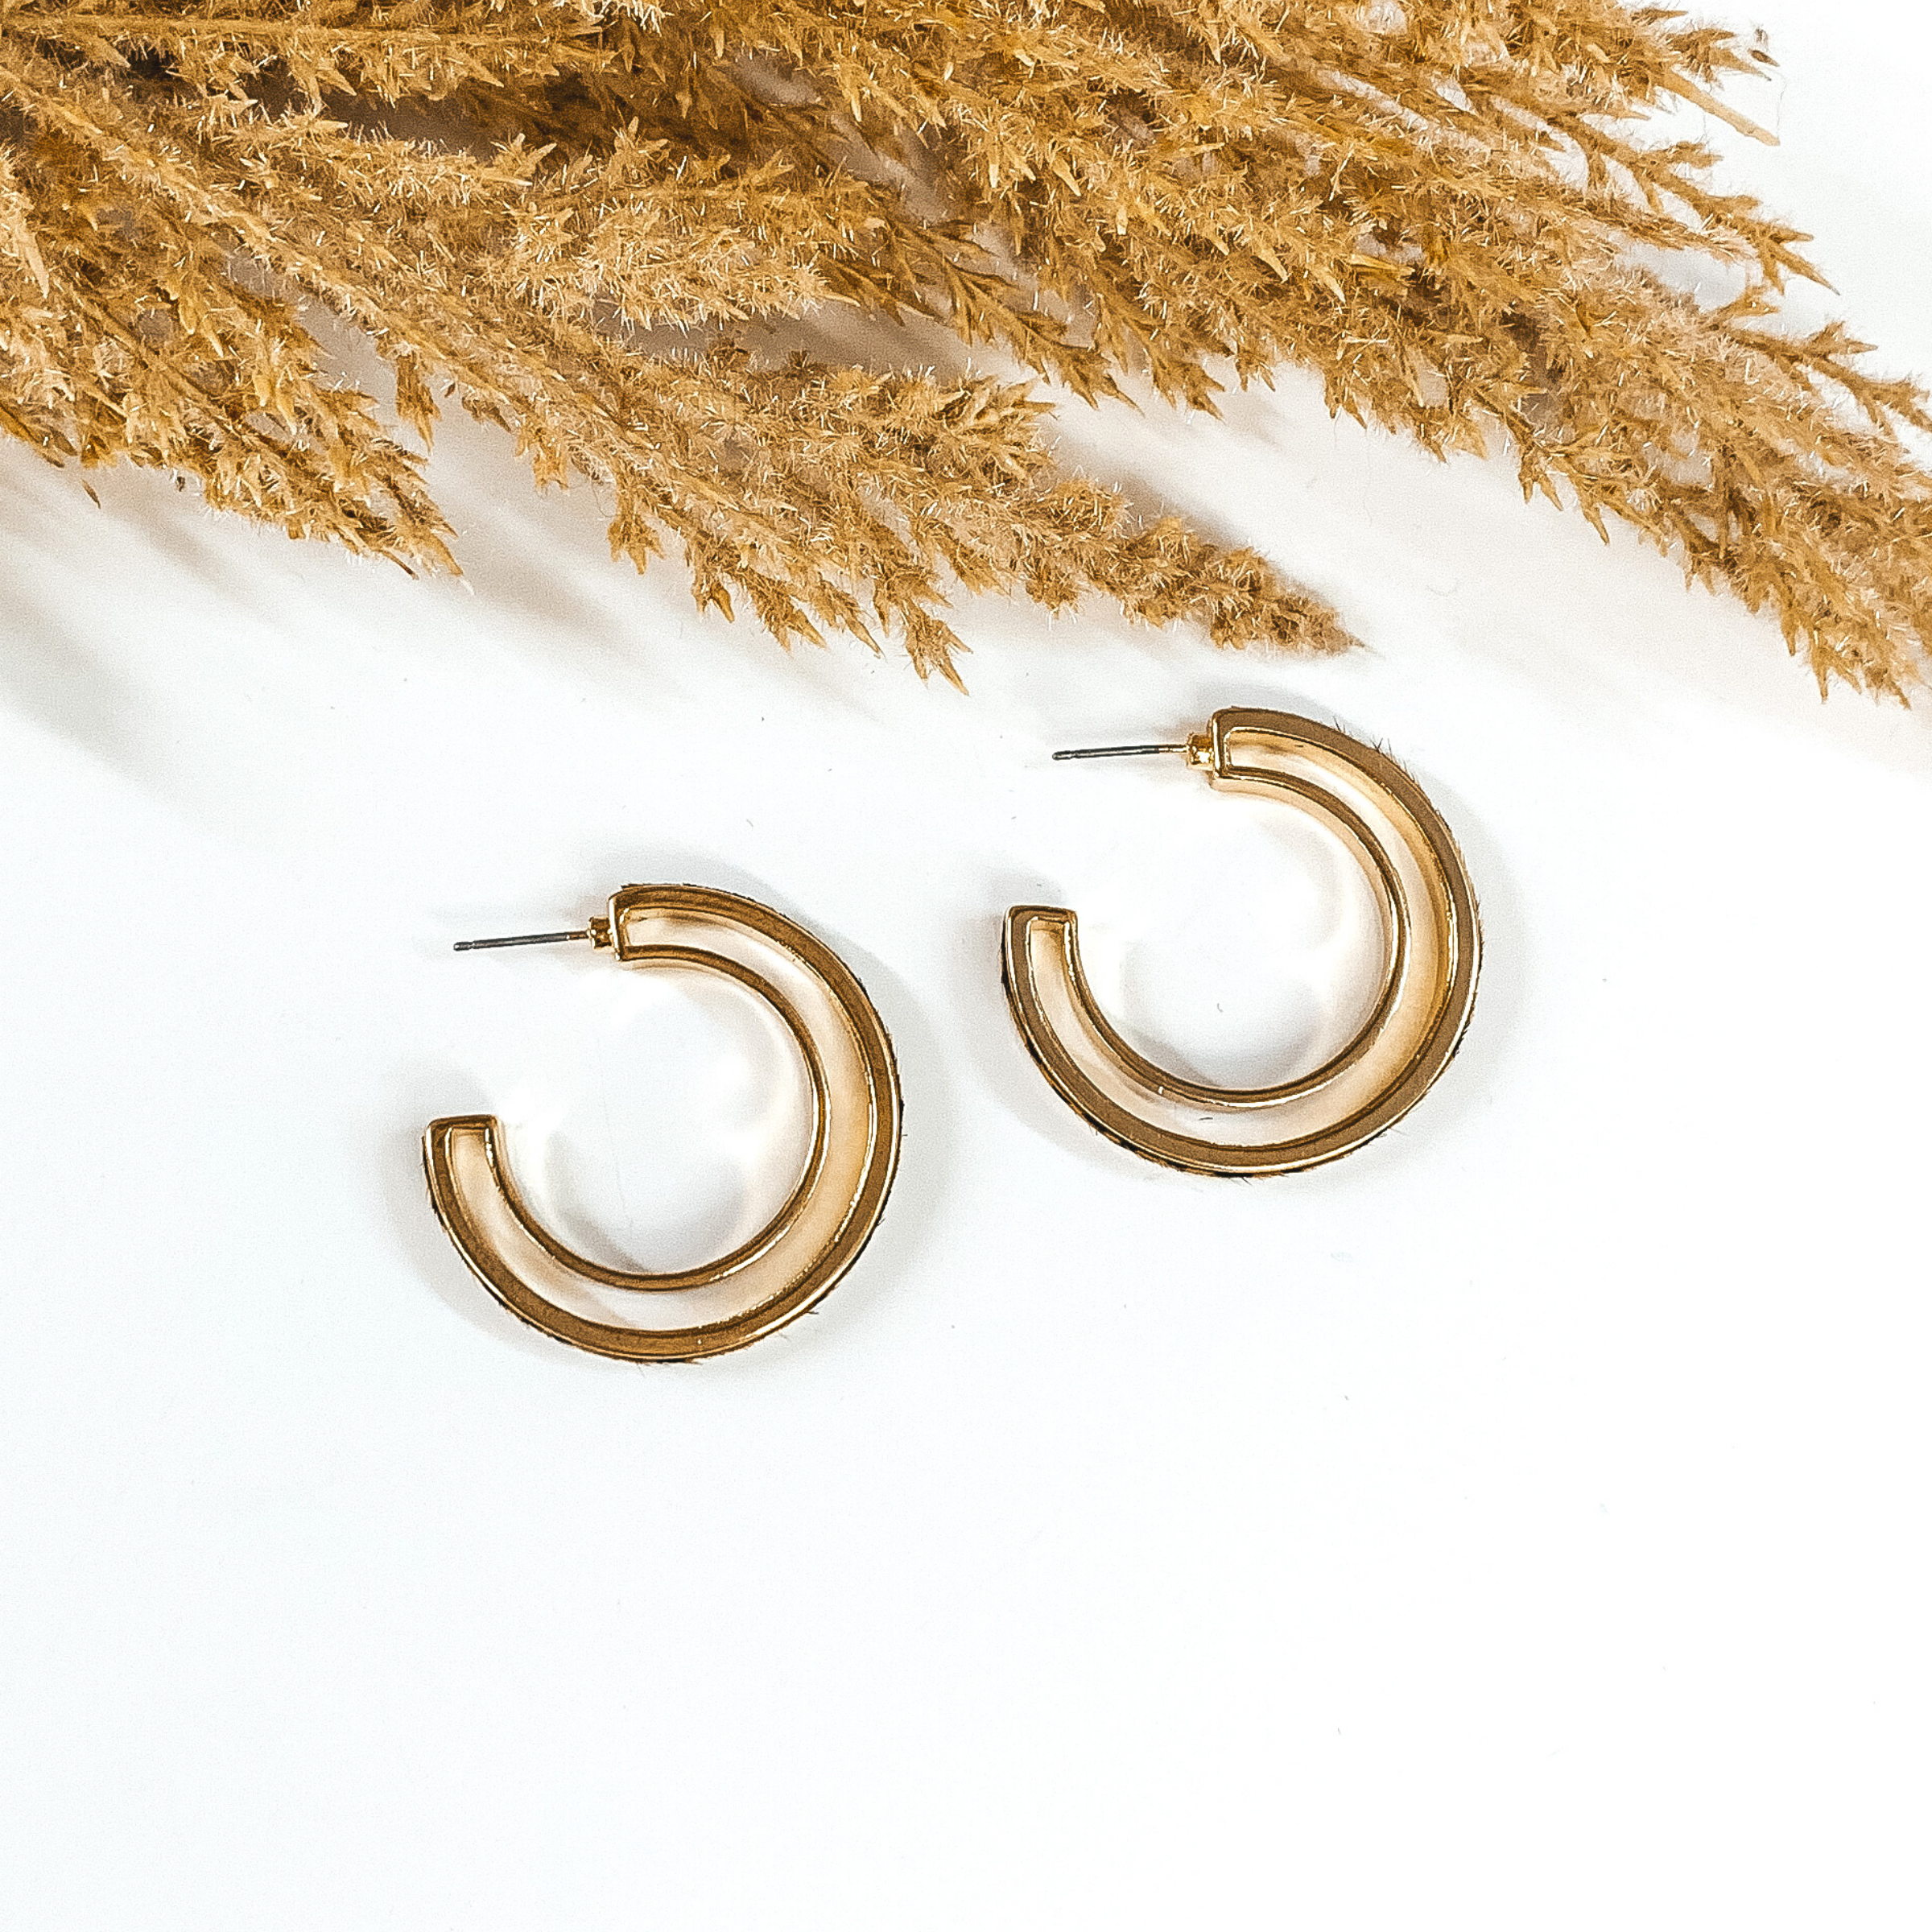 Gold Double Circle Hoop Earrings with Brown Animal Print Inlay - Giddy Up Glamour Boutique